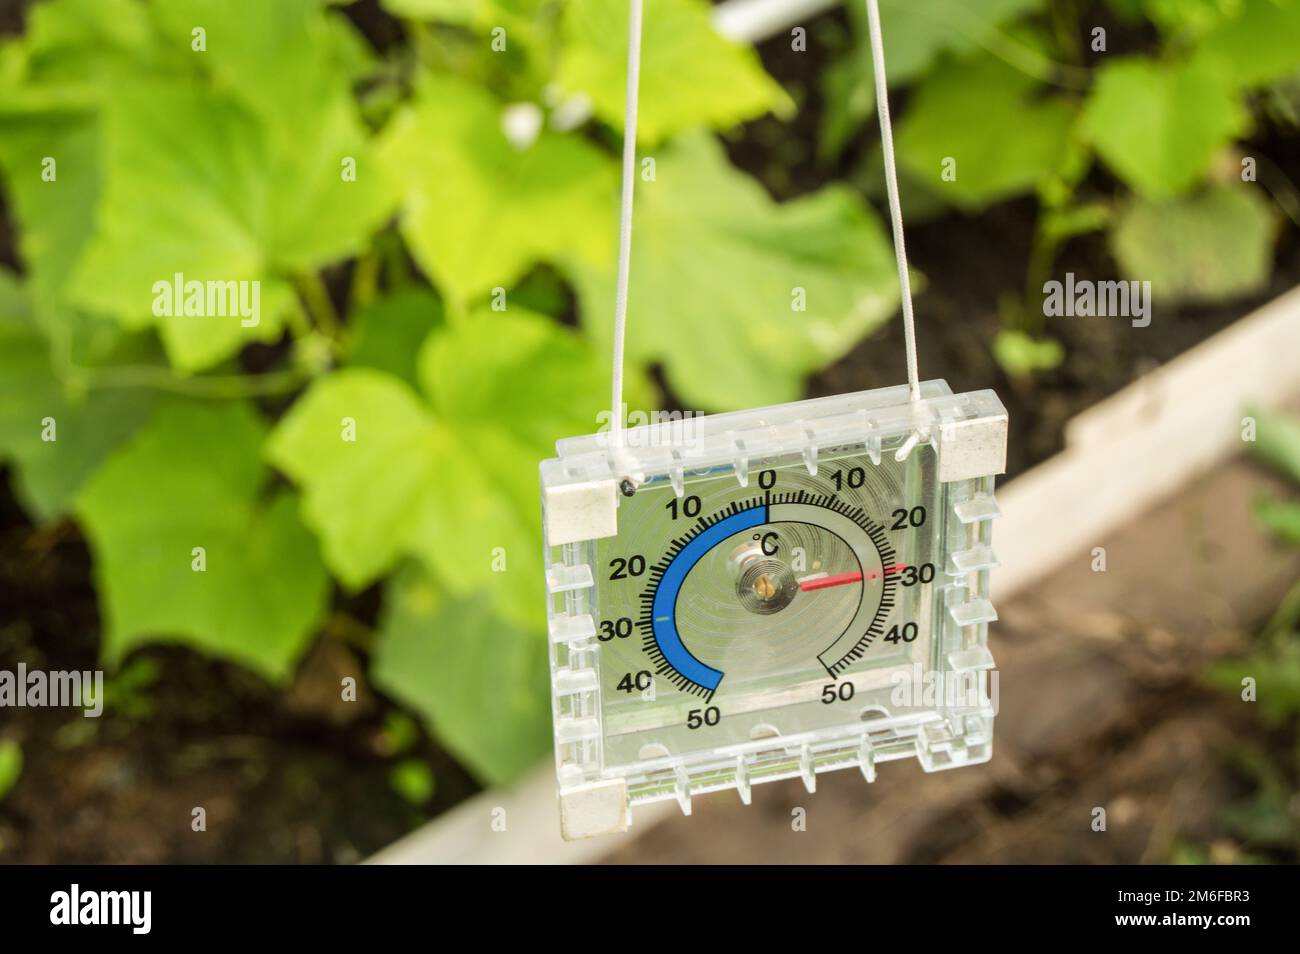 Thermometer Thermostat Instrument Measure Air Temperature Stock Photo  533053651